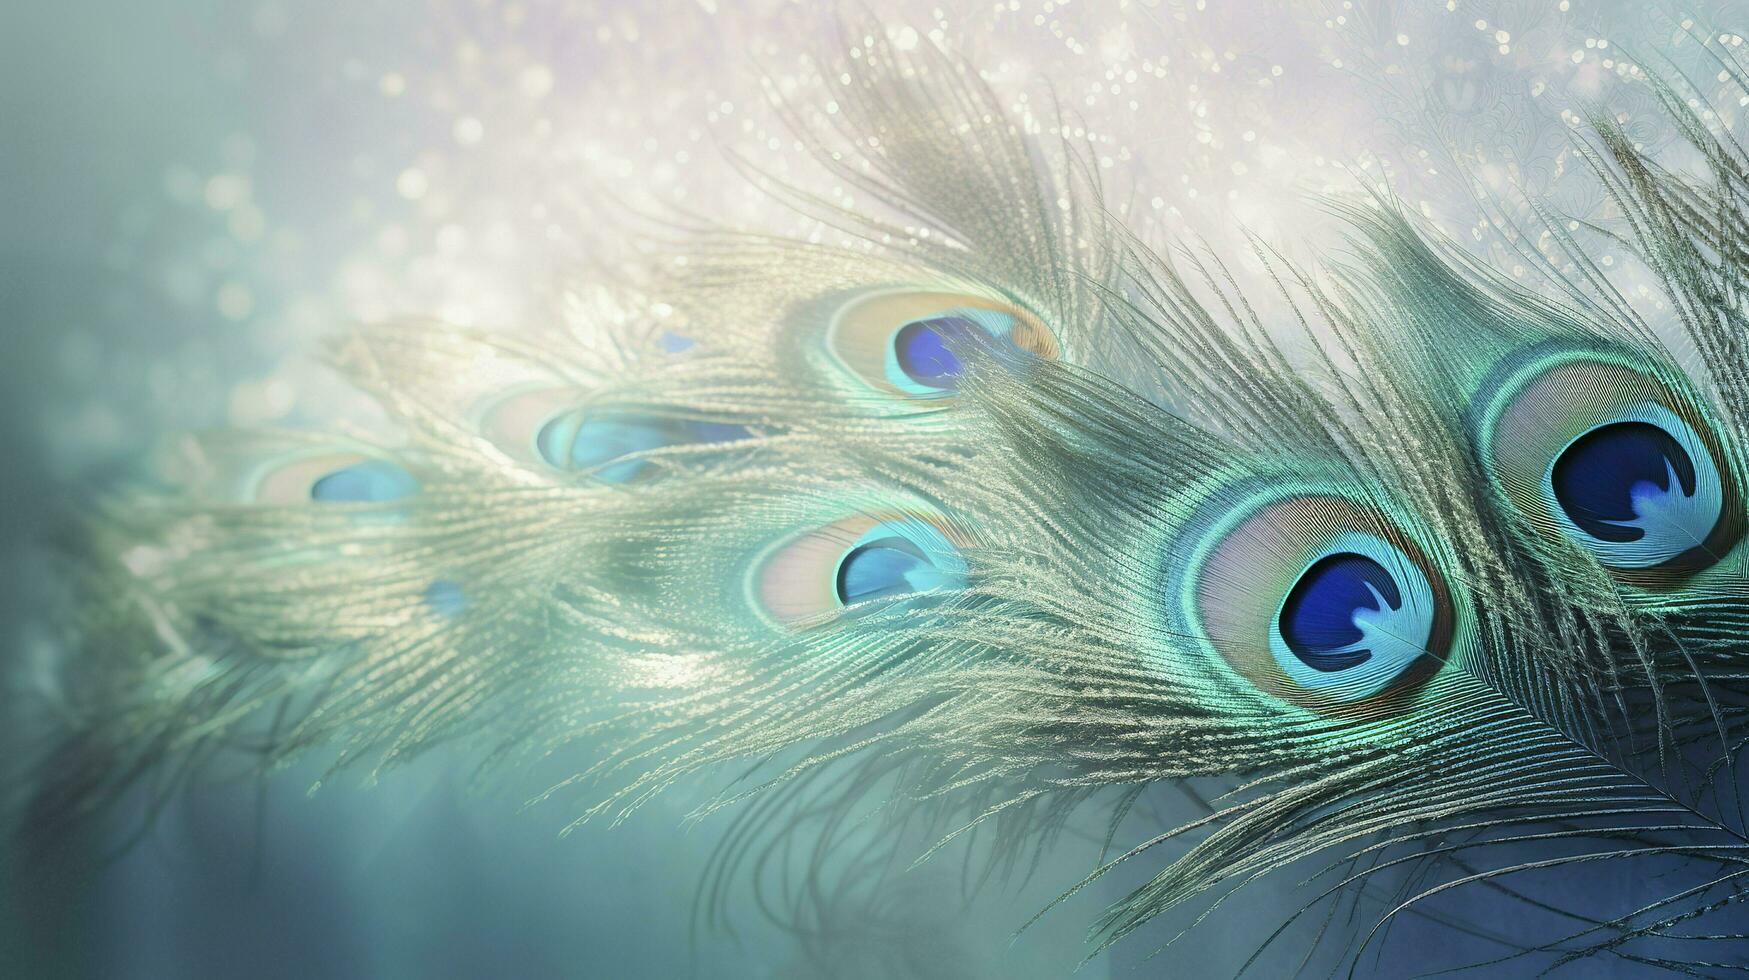 Peacock Feather HD Wallpapers - Apps on Google Play